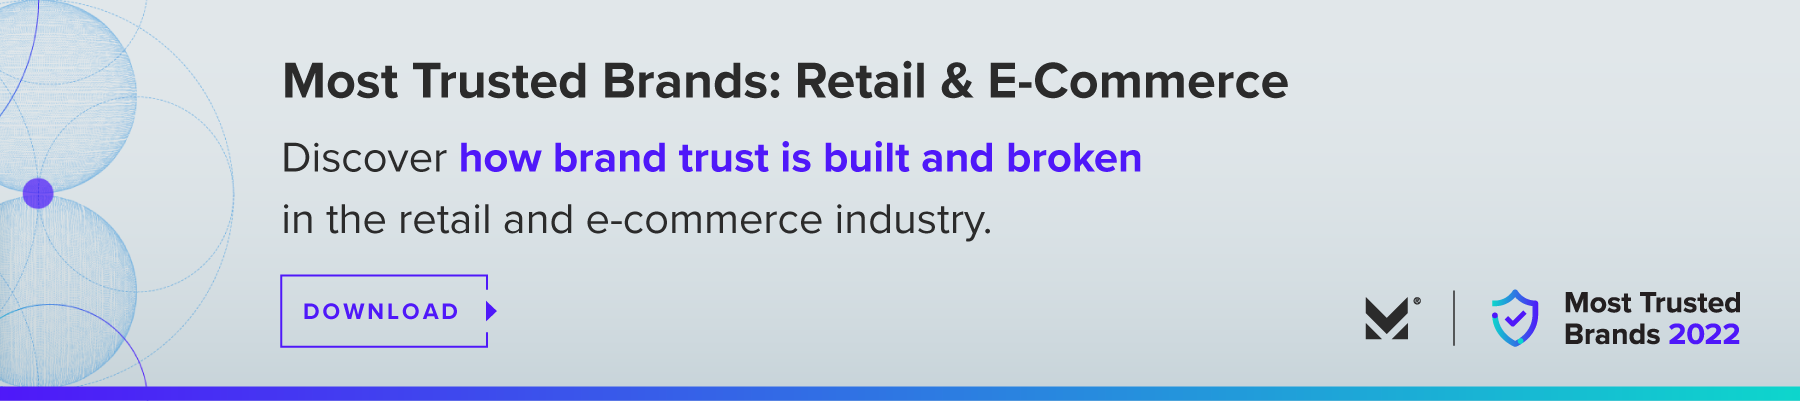 Morning Consult retail and ecommerce trends report download